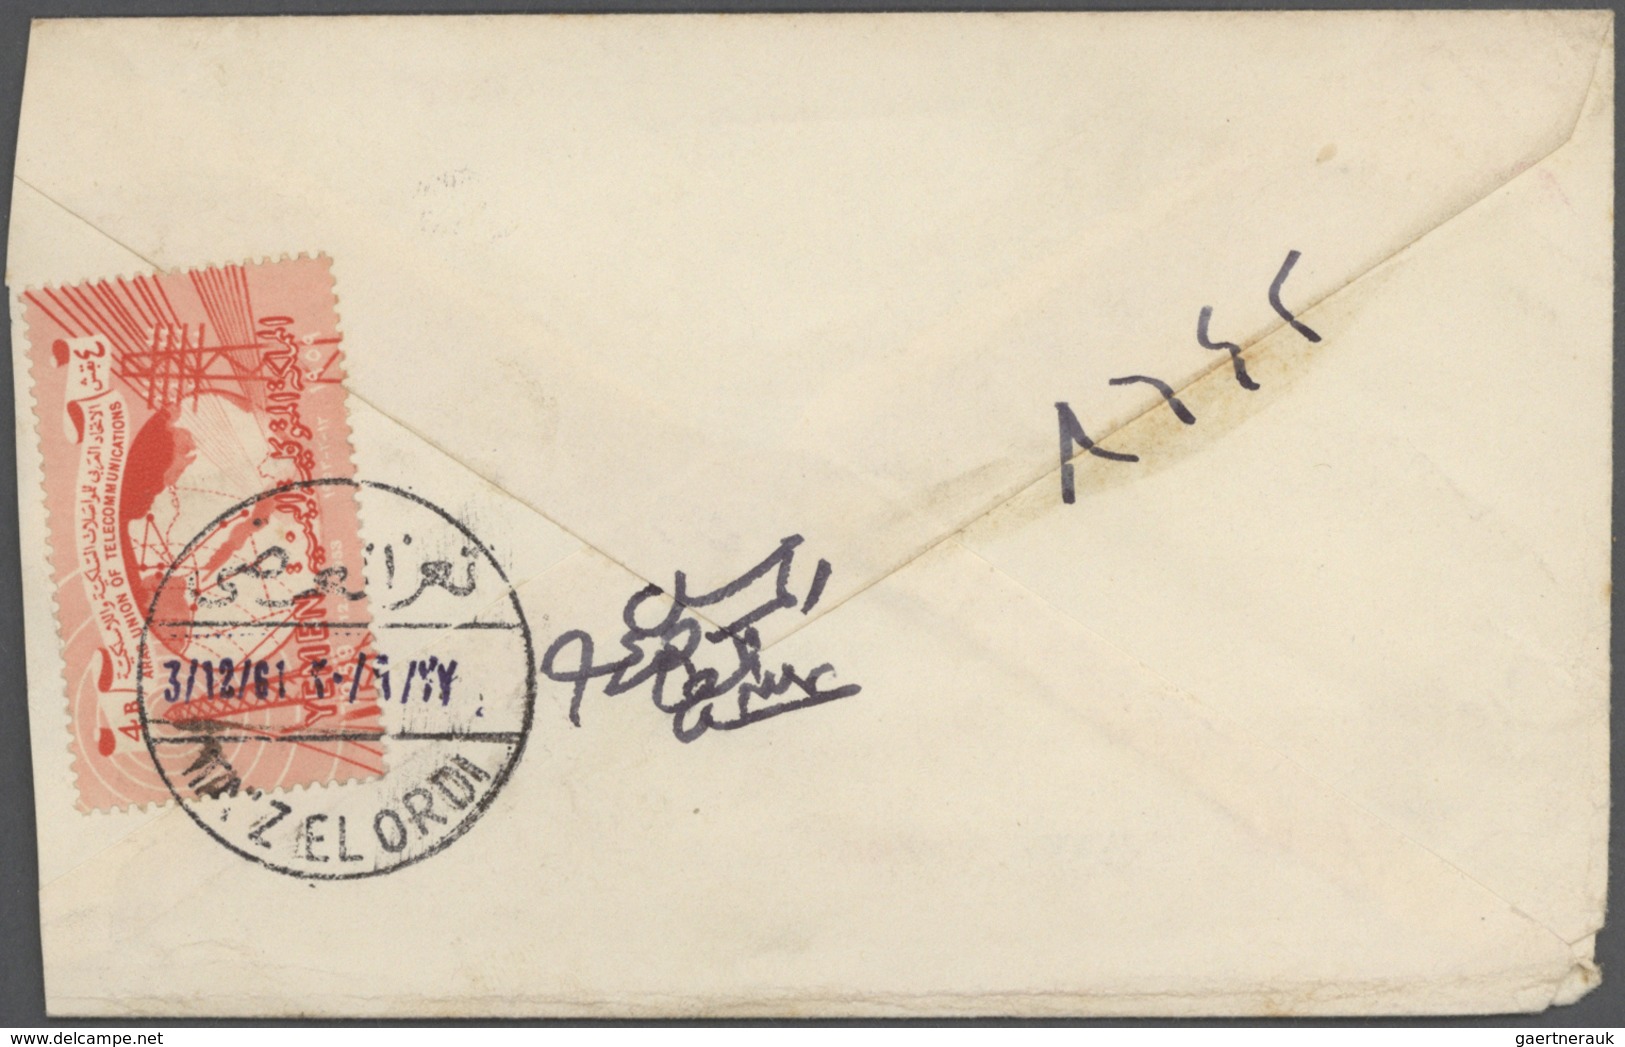 22986 Jemen: 1925-80, Box containing 1095 covers & FDC, including registered mail, air mail, overprinted i